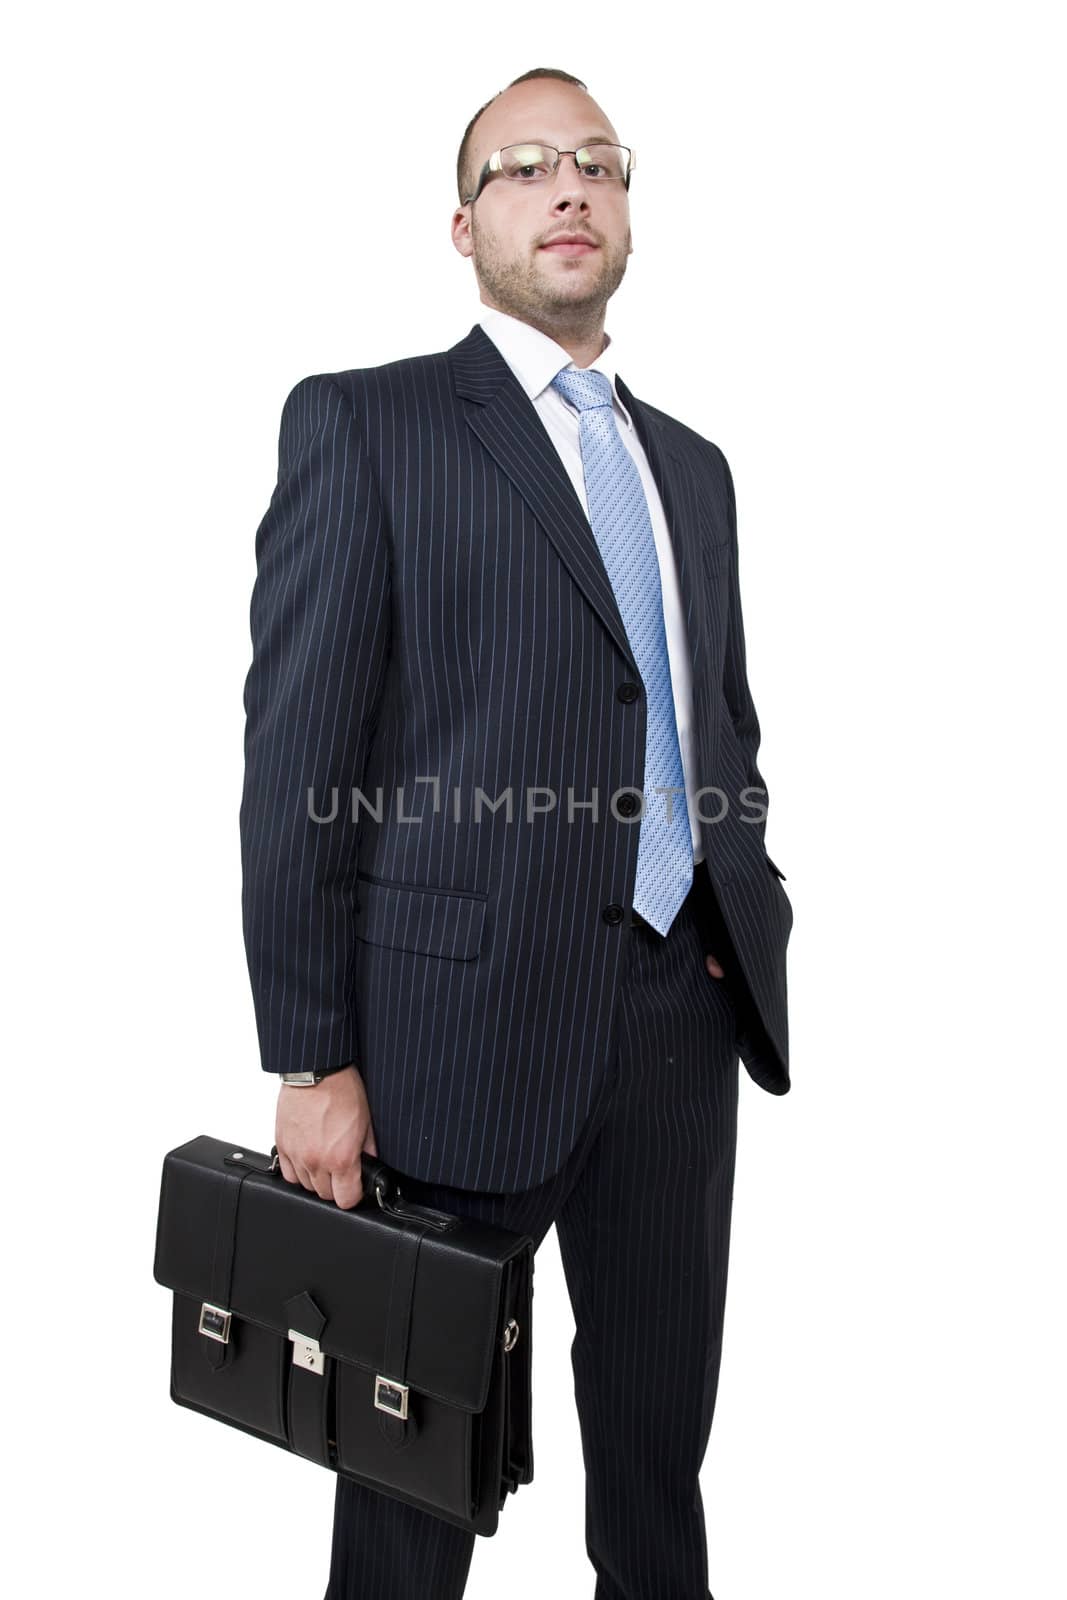 businessman with business bag on isolated background

